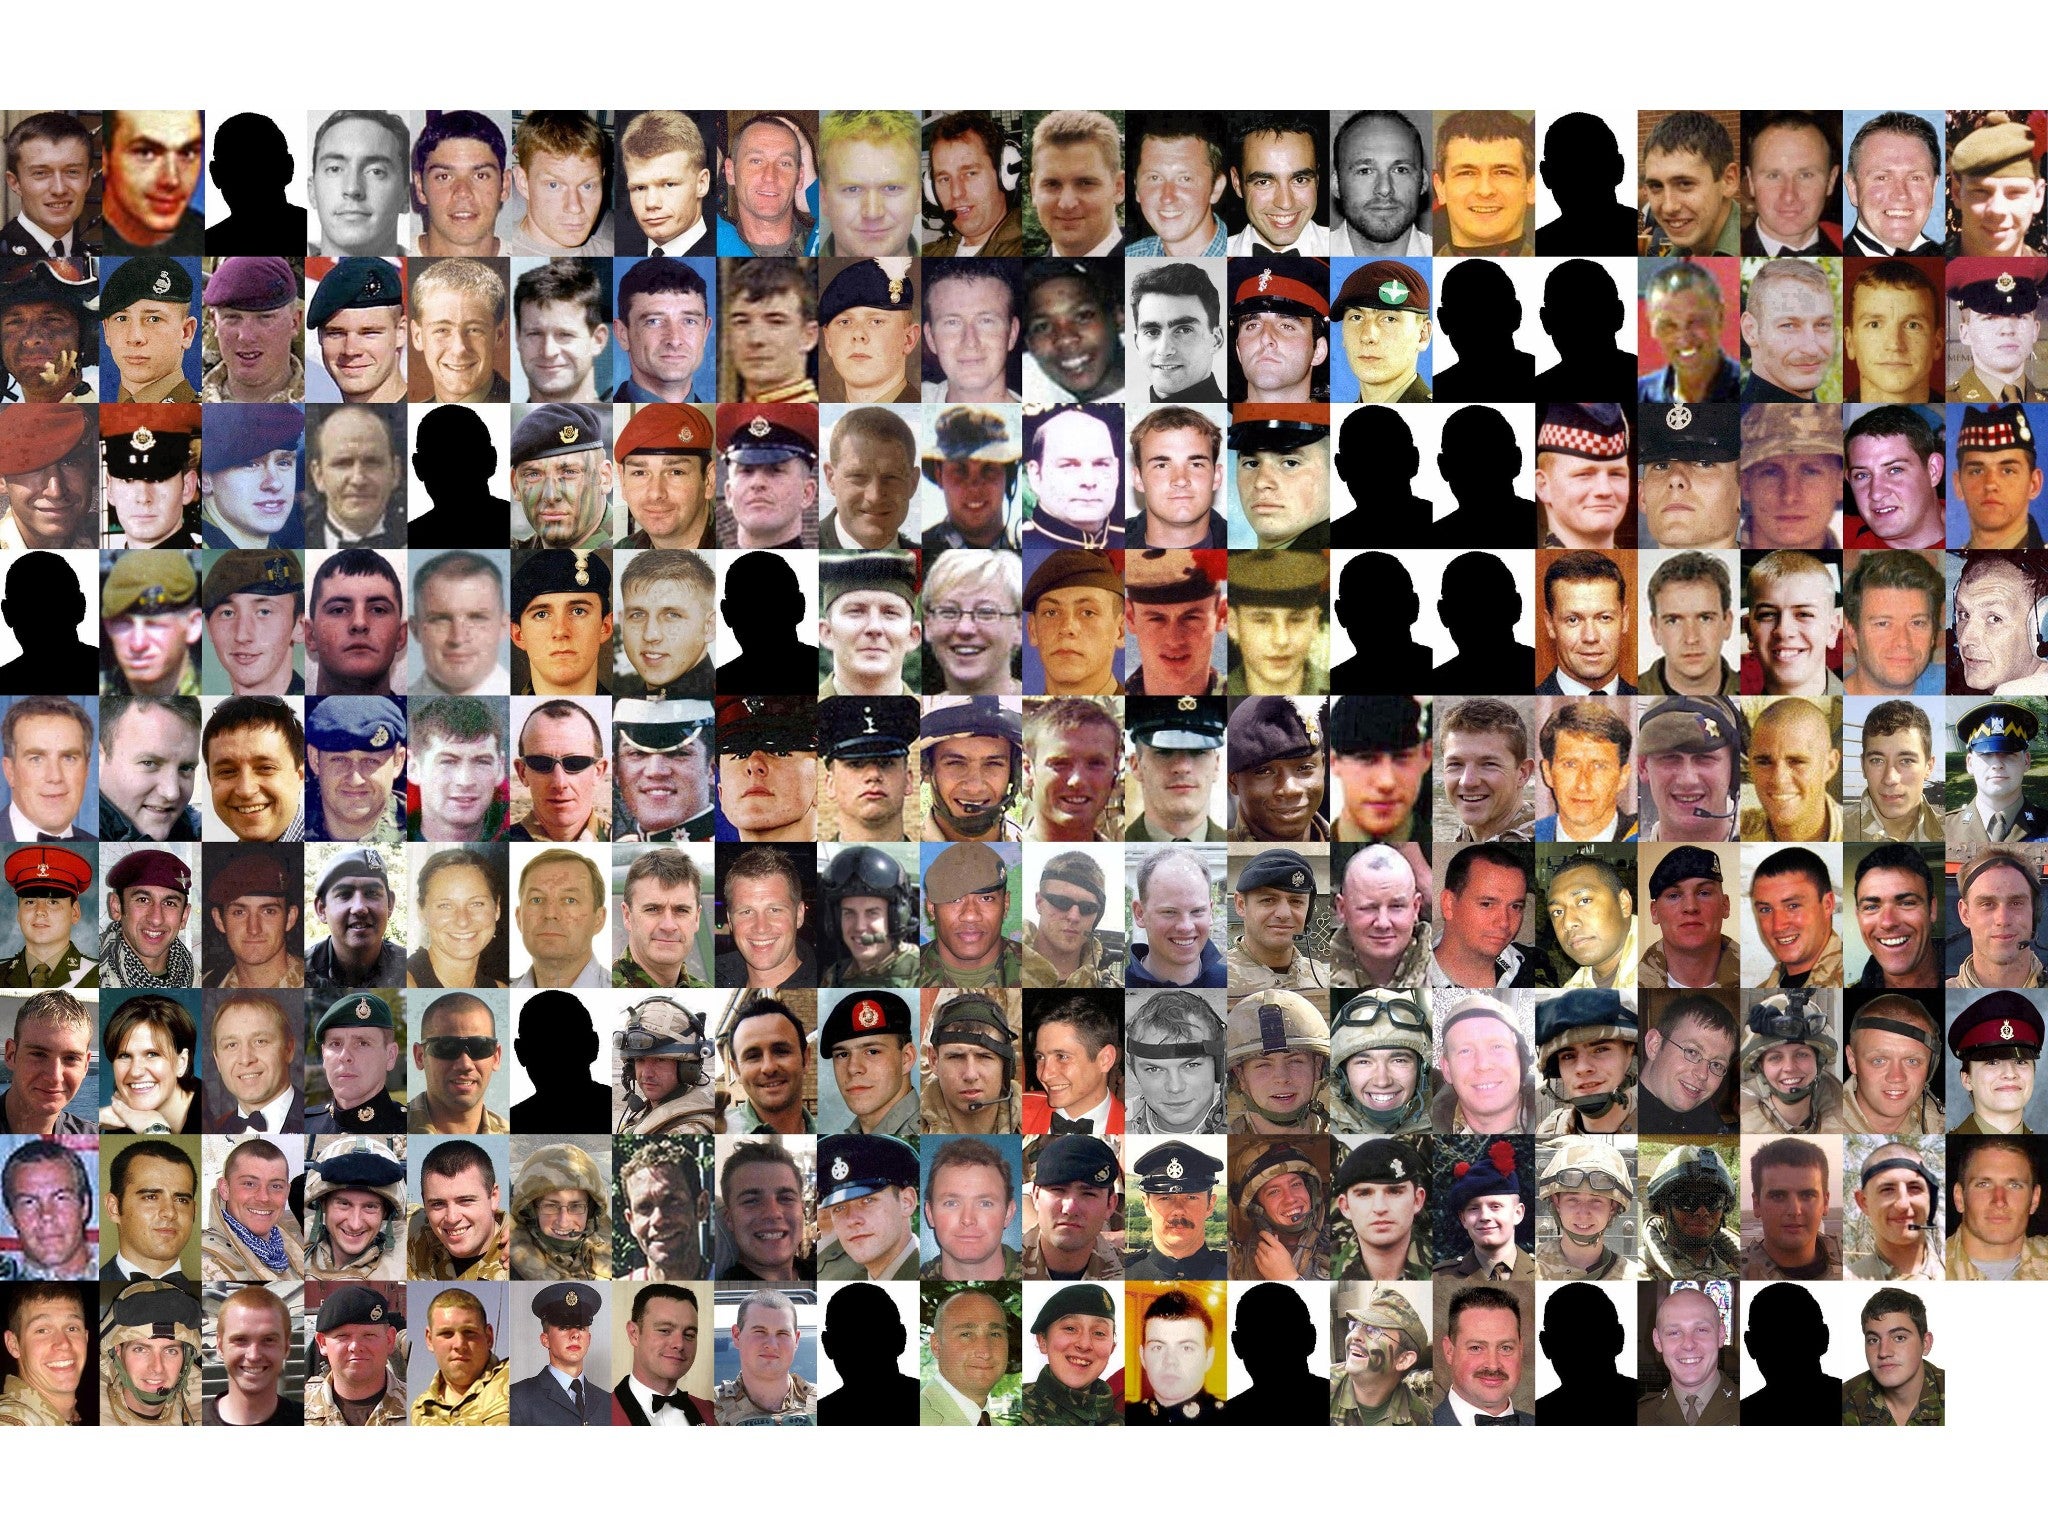 The members of the British services killed in Iraq